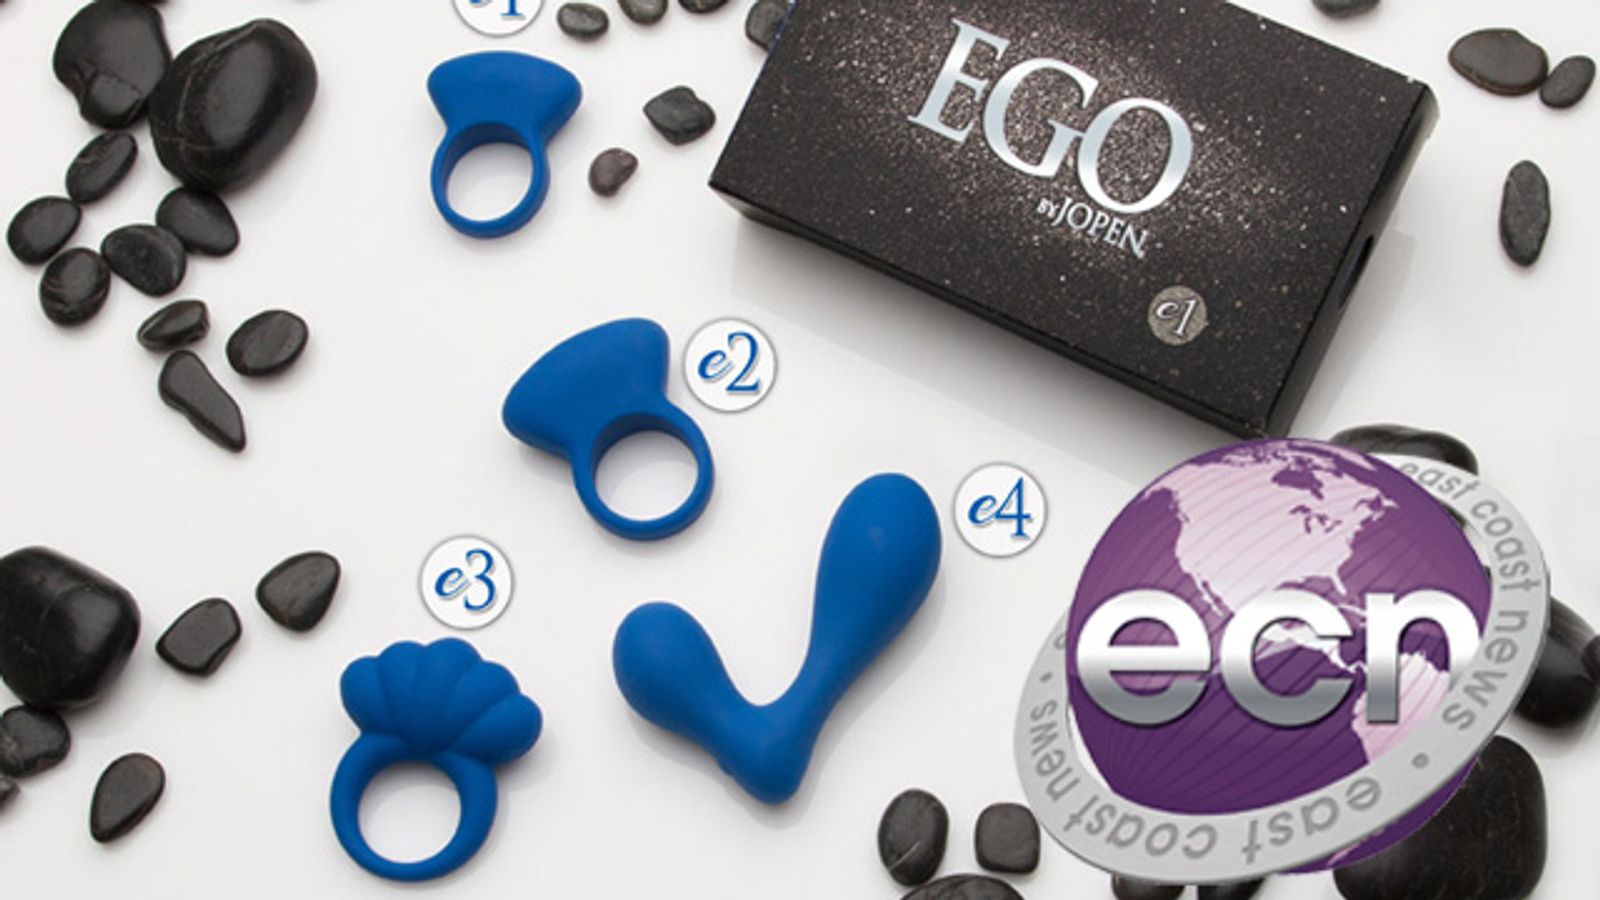 East Coast News Introduces Ego by Jopen to Retailers